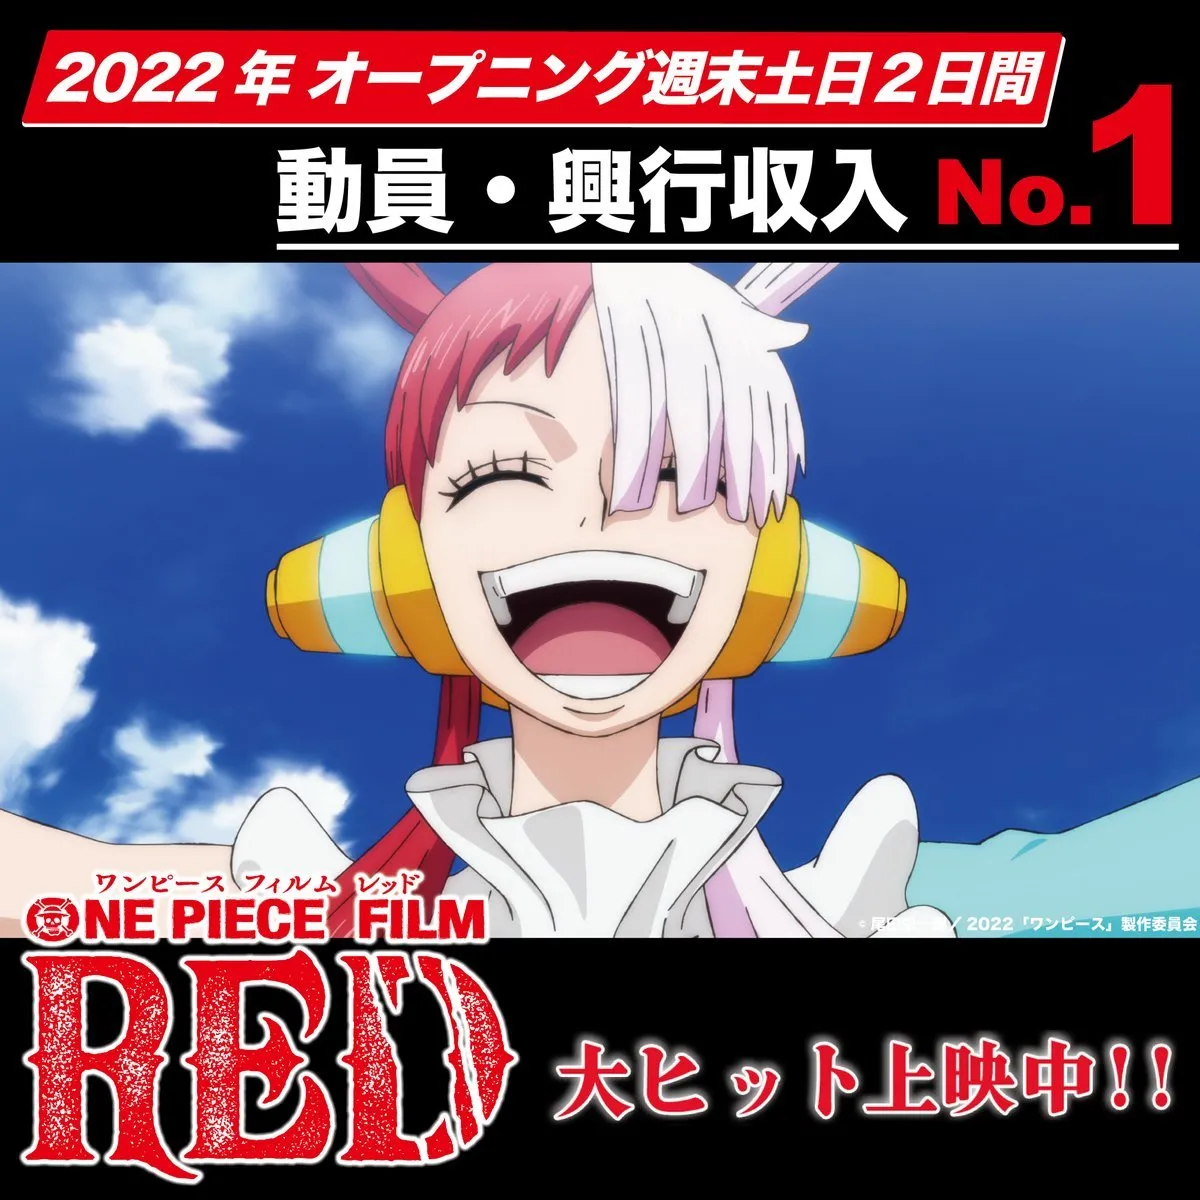  'ONE PIECE FILM RED' hits the second best opening weekend at the Japanese box office | FMV6